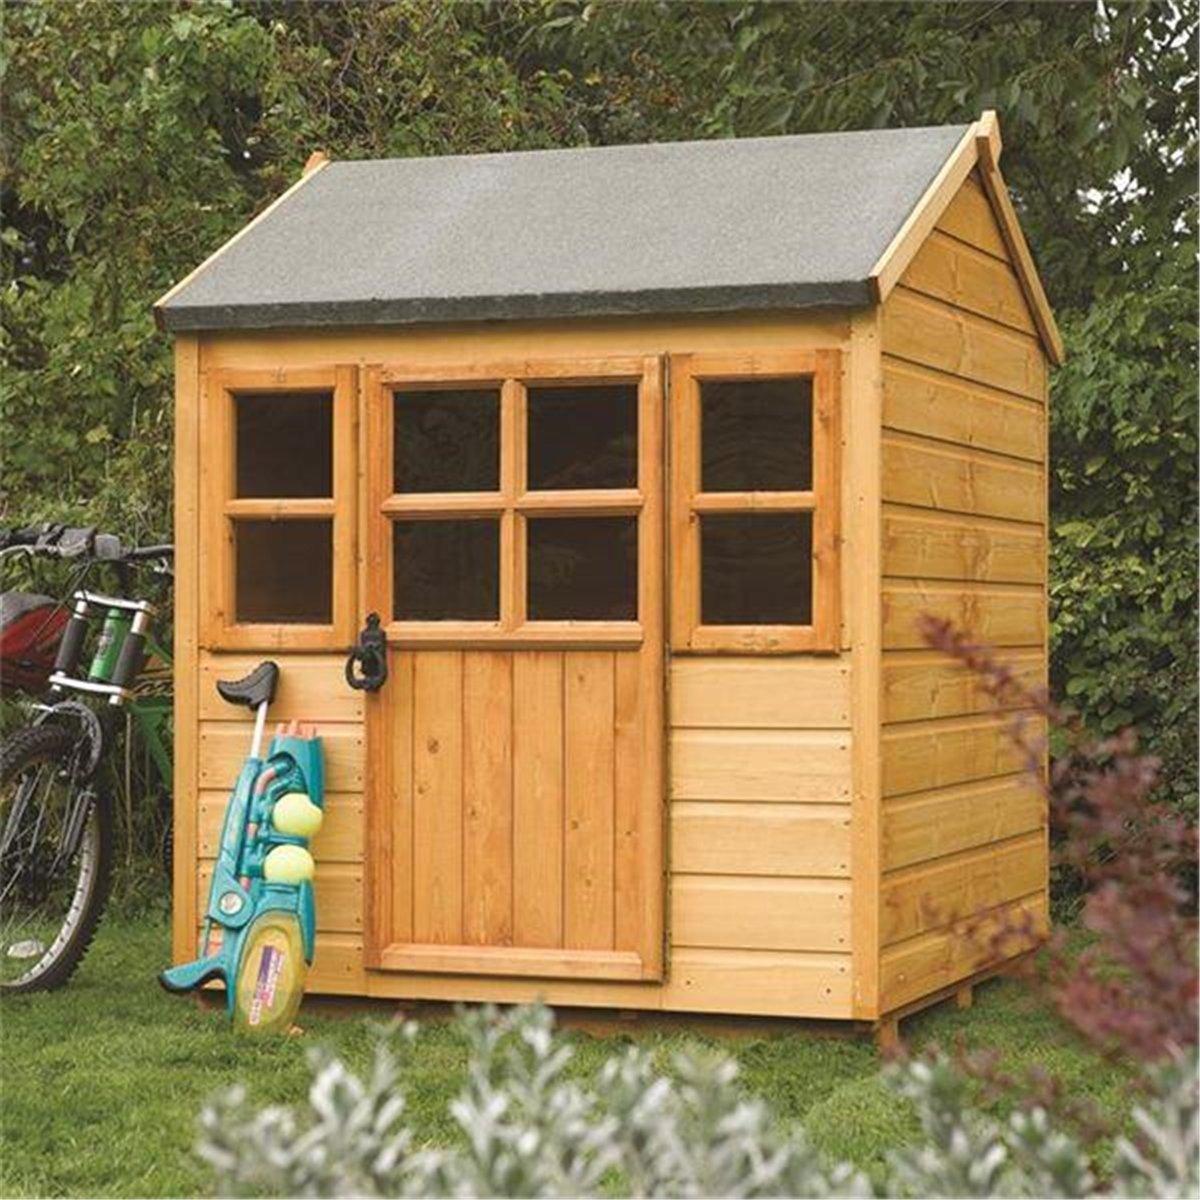 4 x 4 Deluxe Little Lodge Playhouse